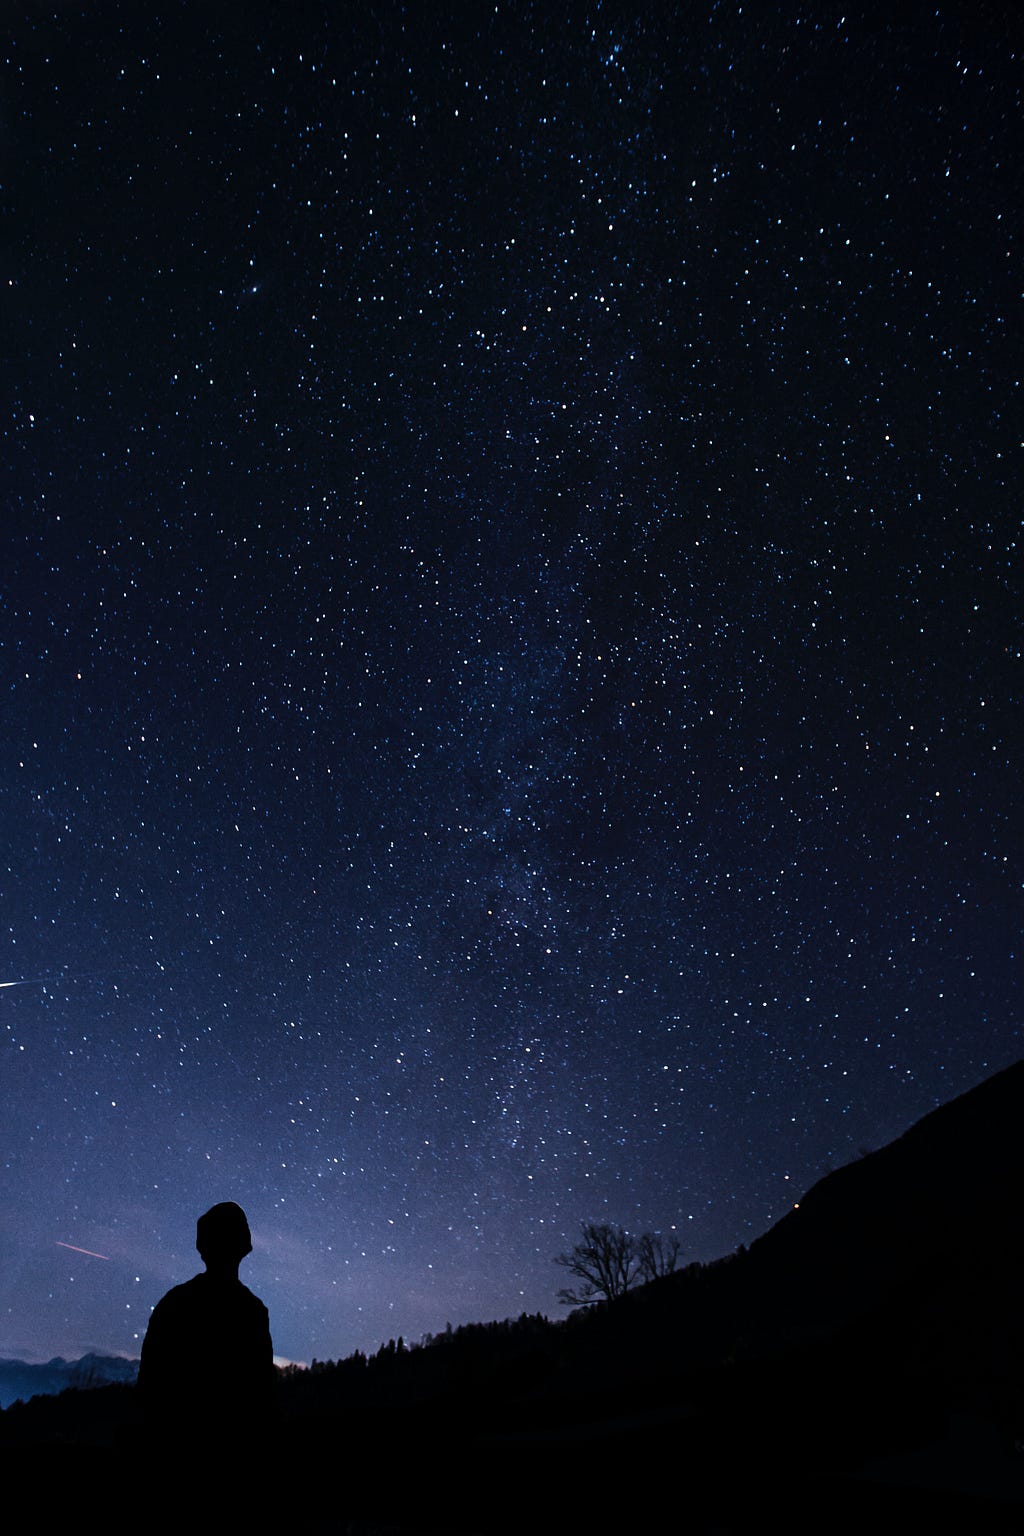 A silhouette of a person looking out at the stars at night. Photo courtesy of Klemen Vrankar and Unsplash.